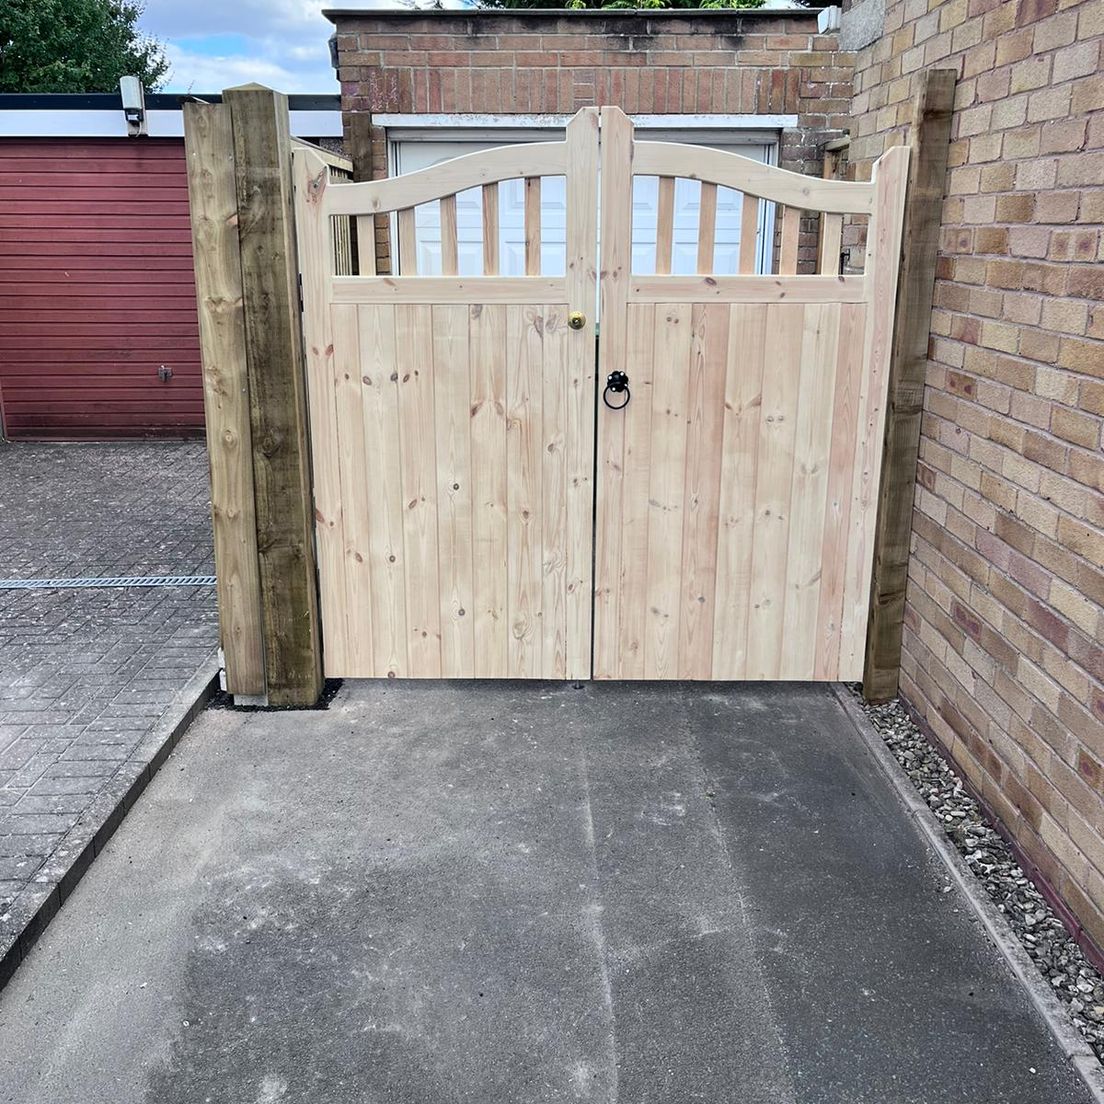 New double wooden gate